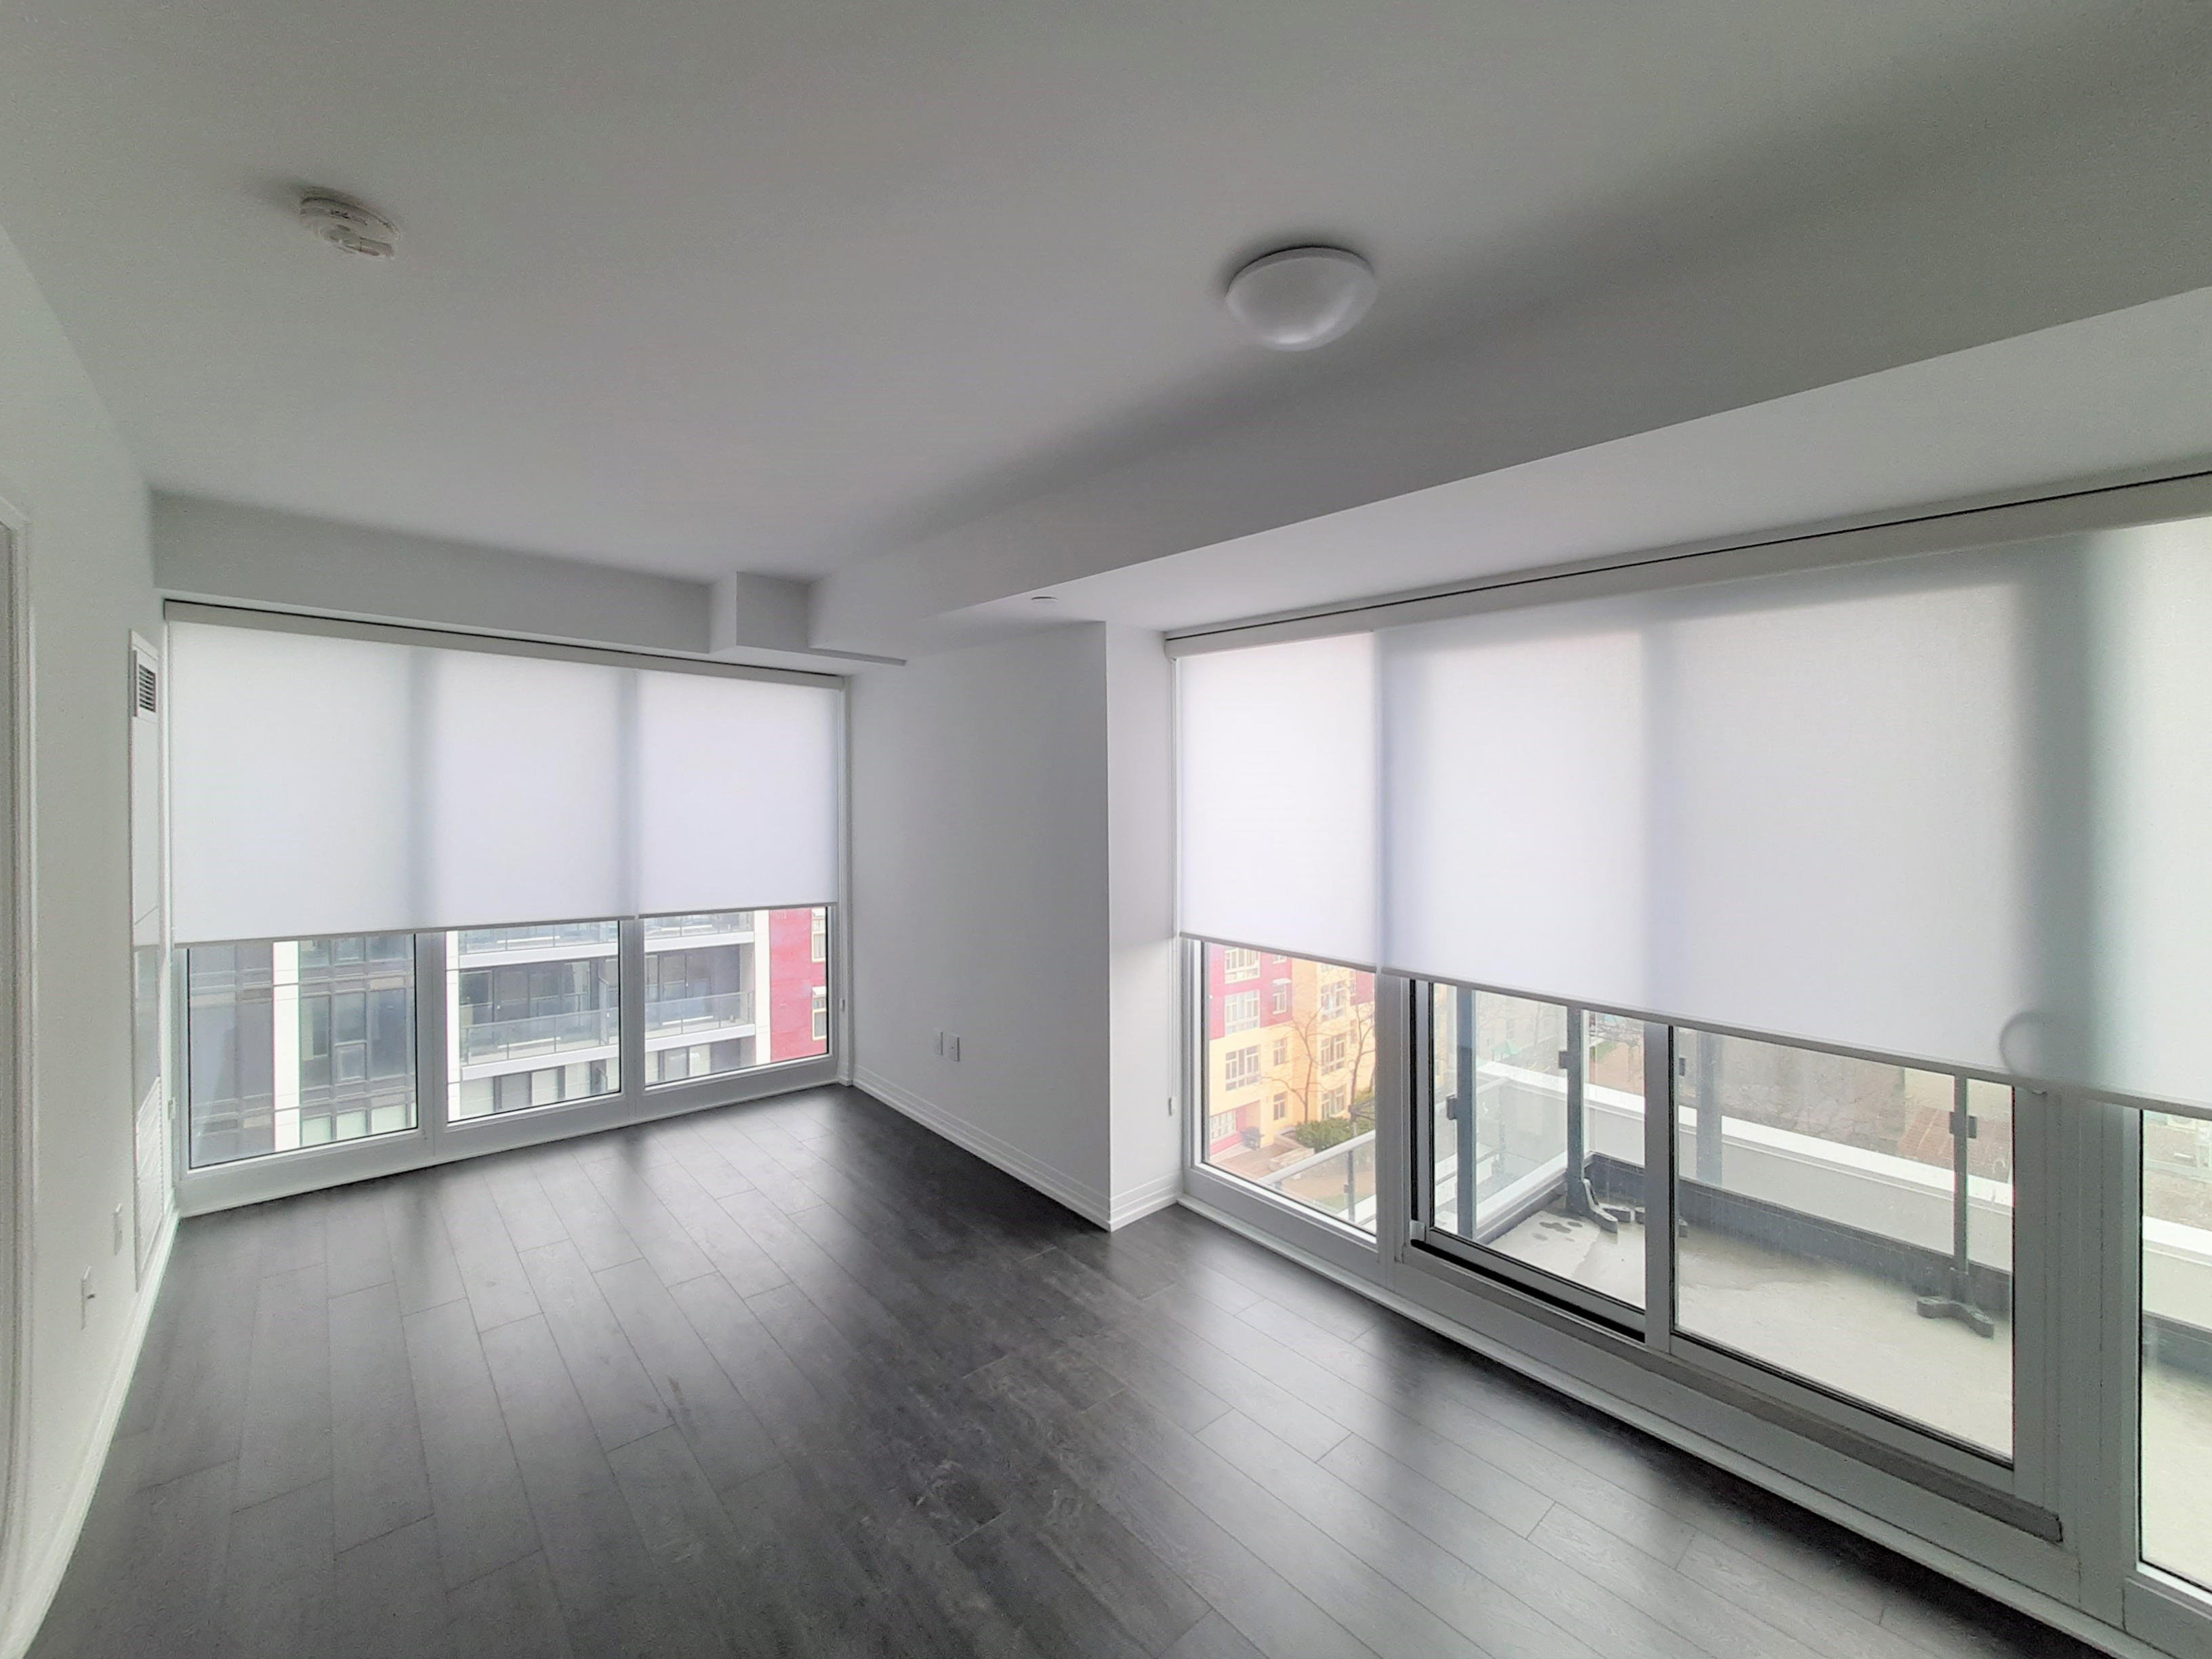 This Toronto Condo has light filtering roller shades that offer 100% privacy while giving a light an Budget Blinds of Southeast Toronto Toronto (416)243-0007